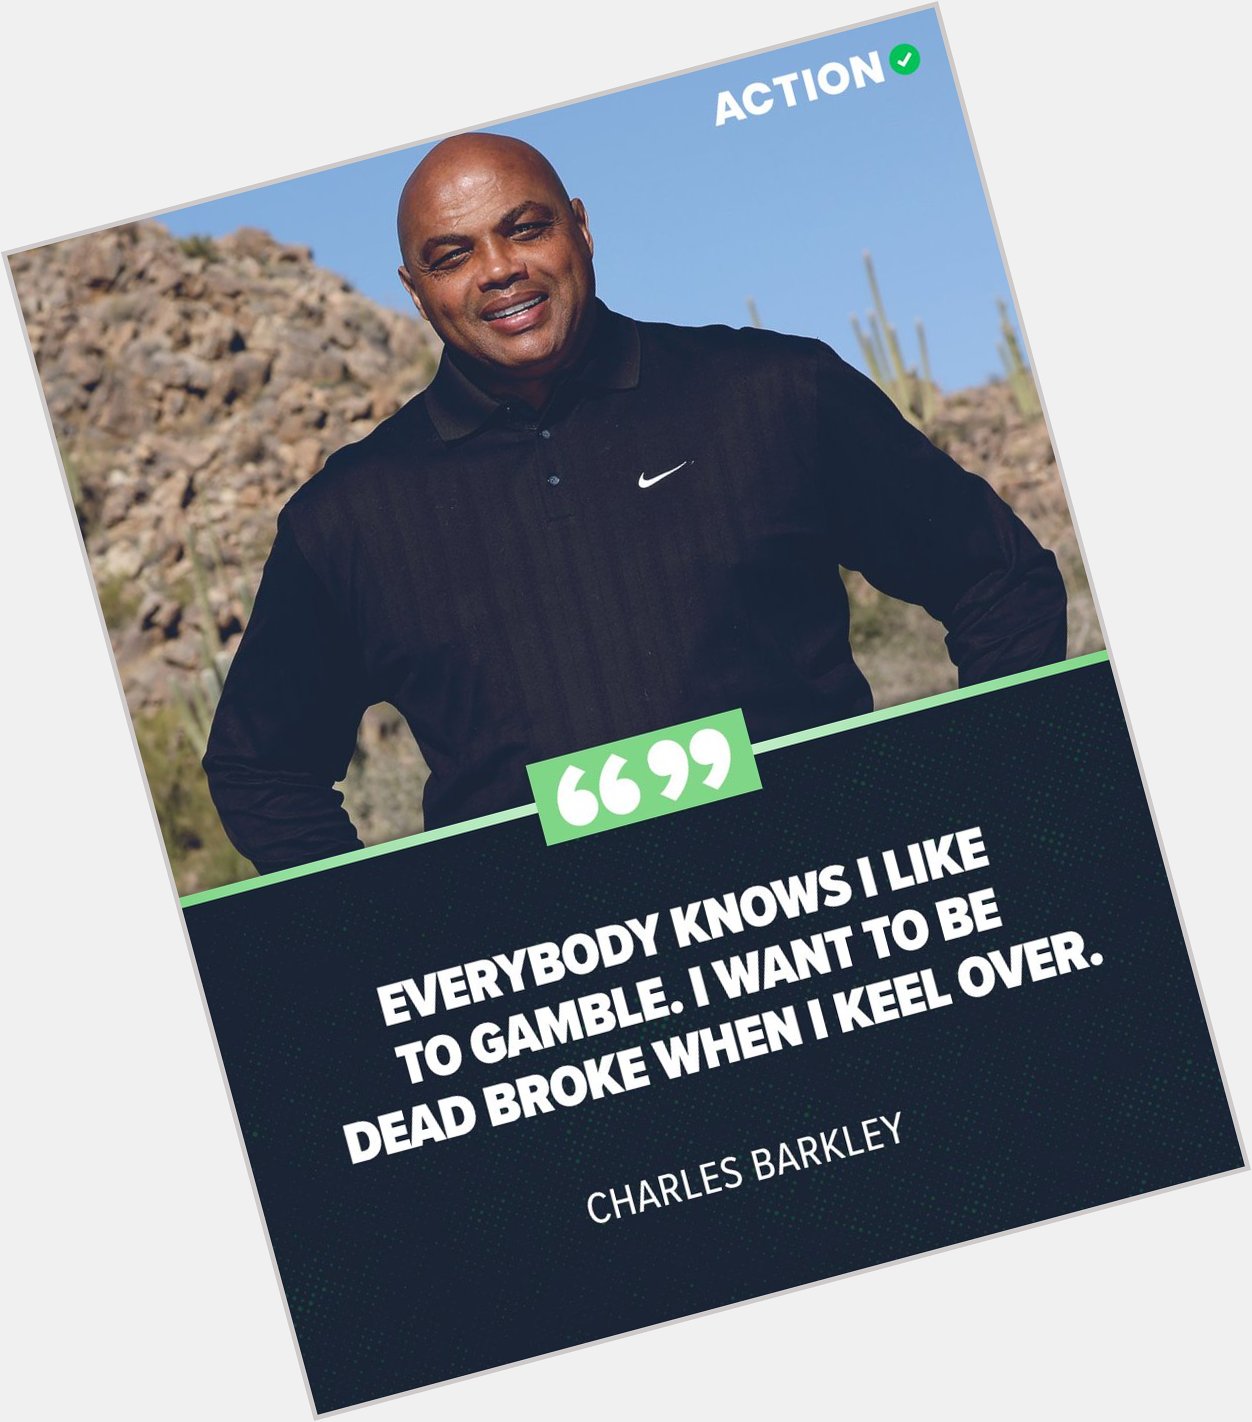 Happy Birthday to Charles Barkley, who gave us this amazing quote 